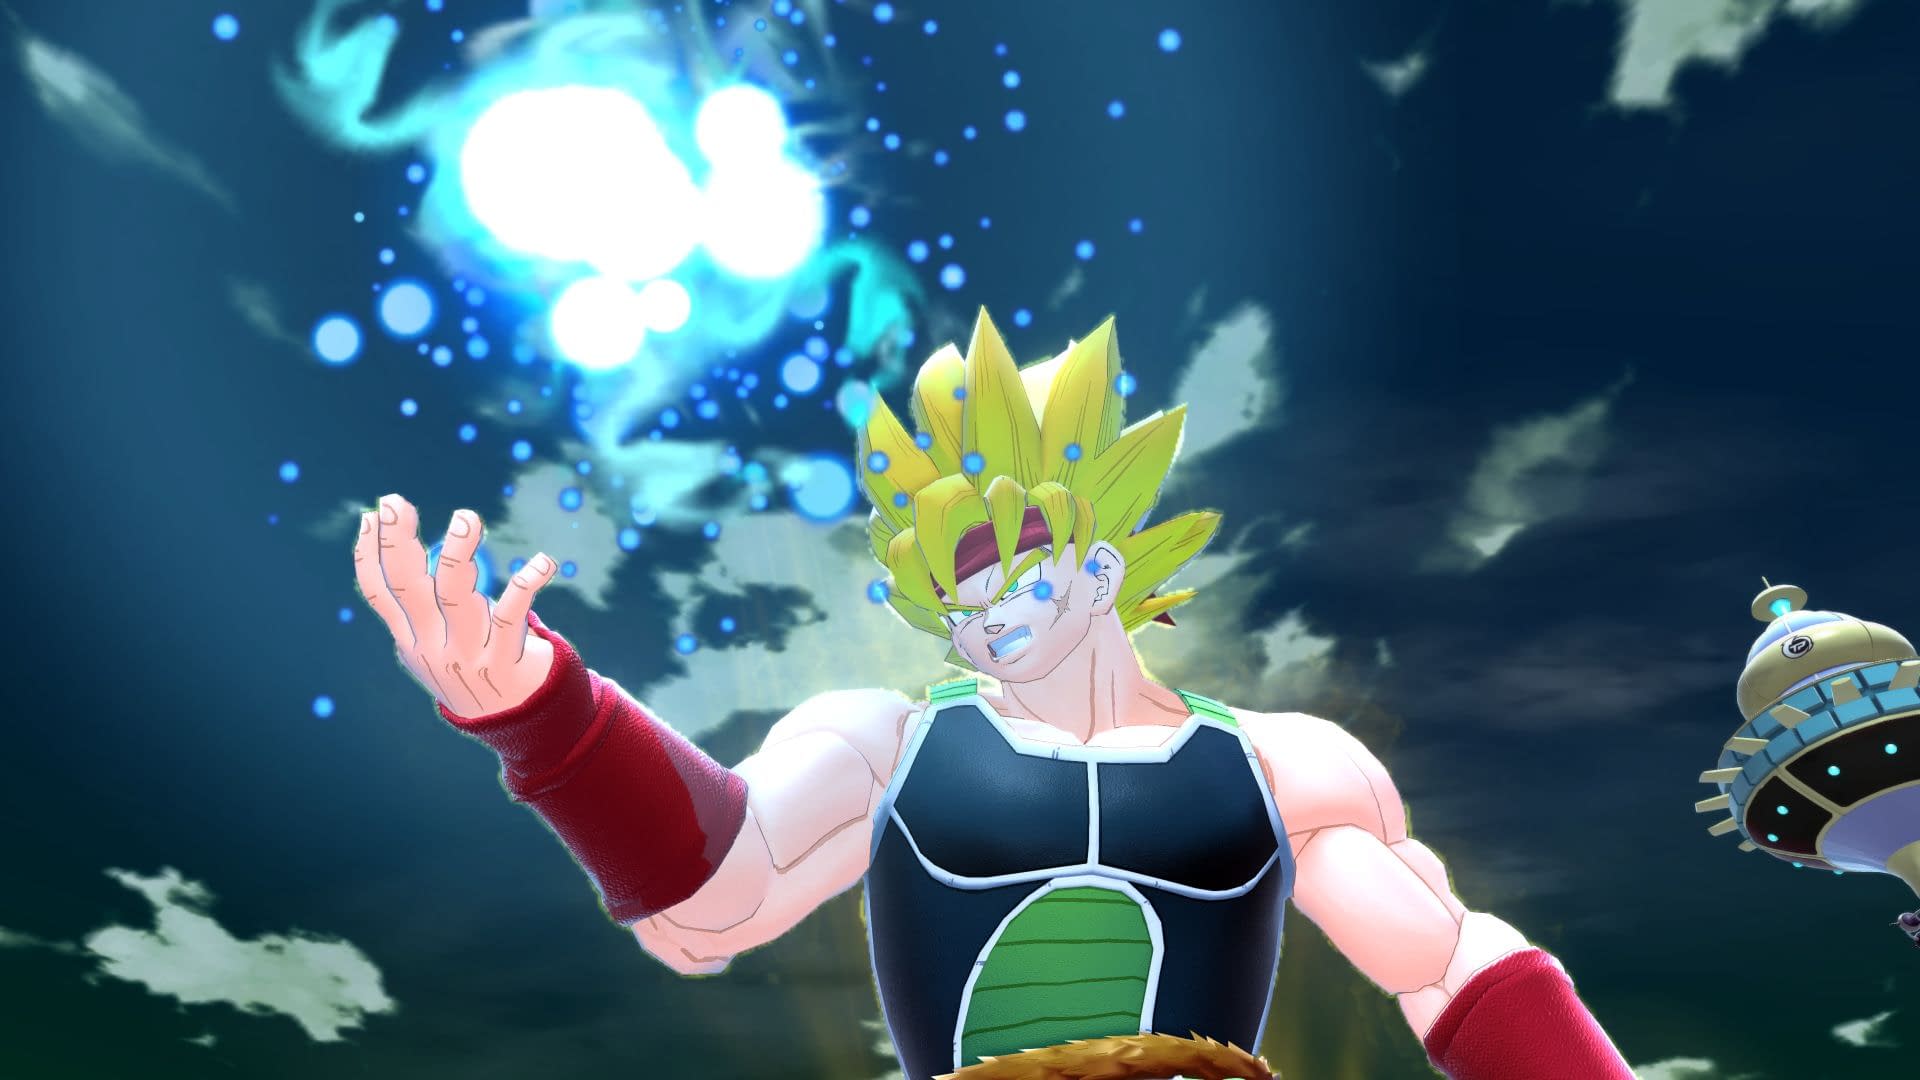 How to get an Avatar Transformation in Anime Fighters Simulator